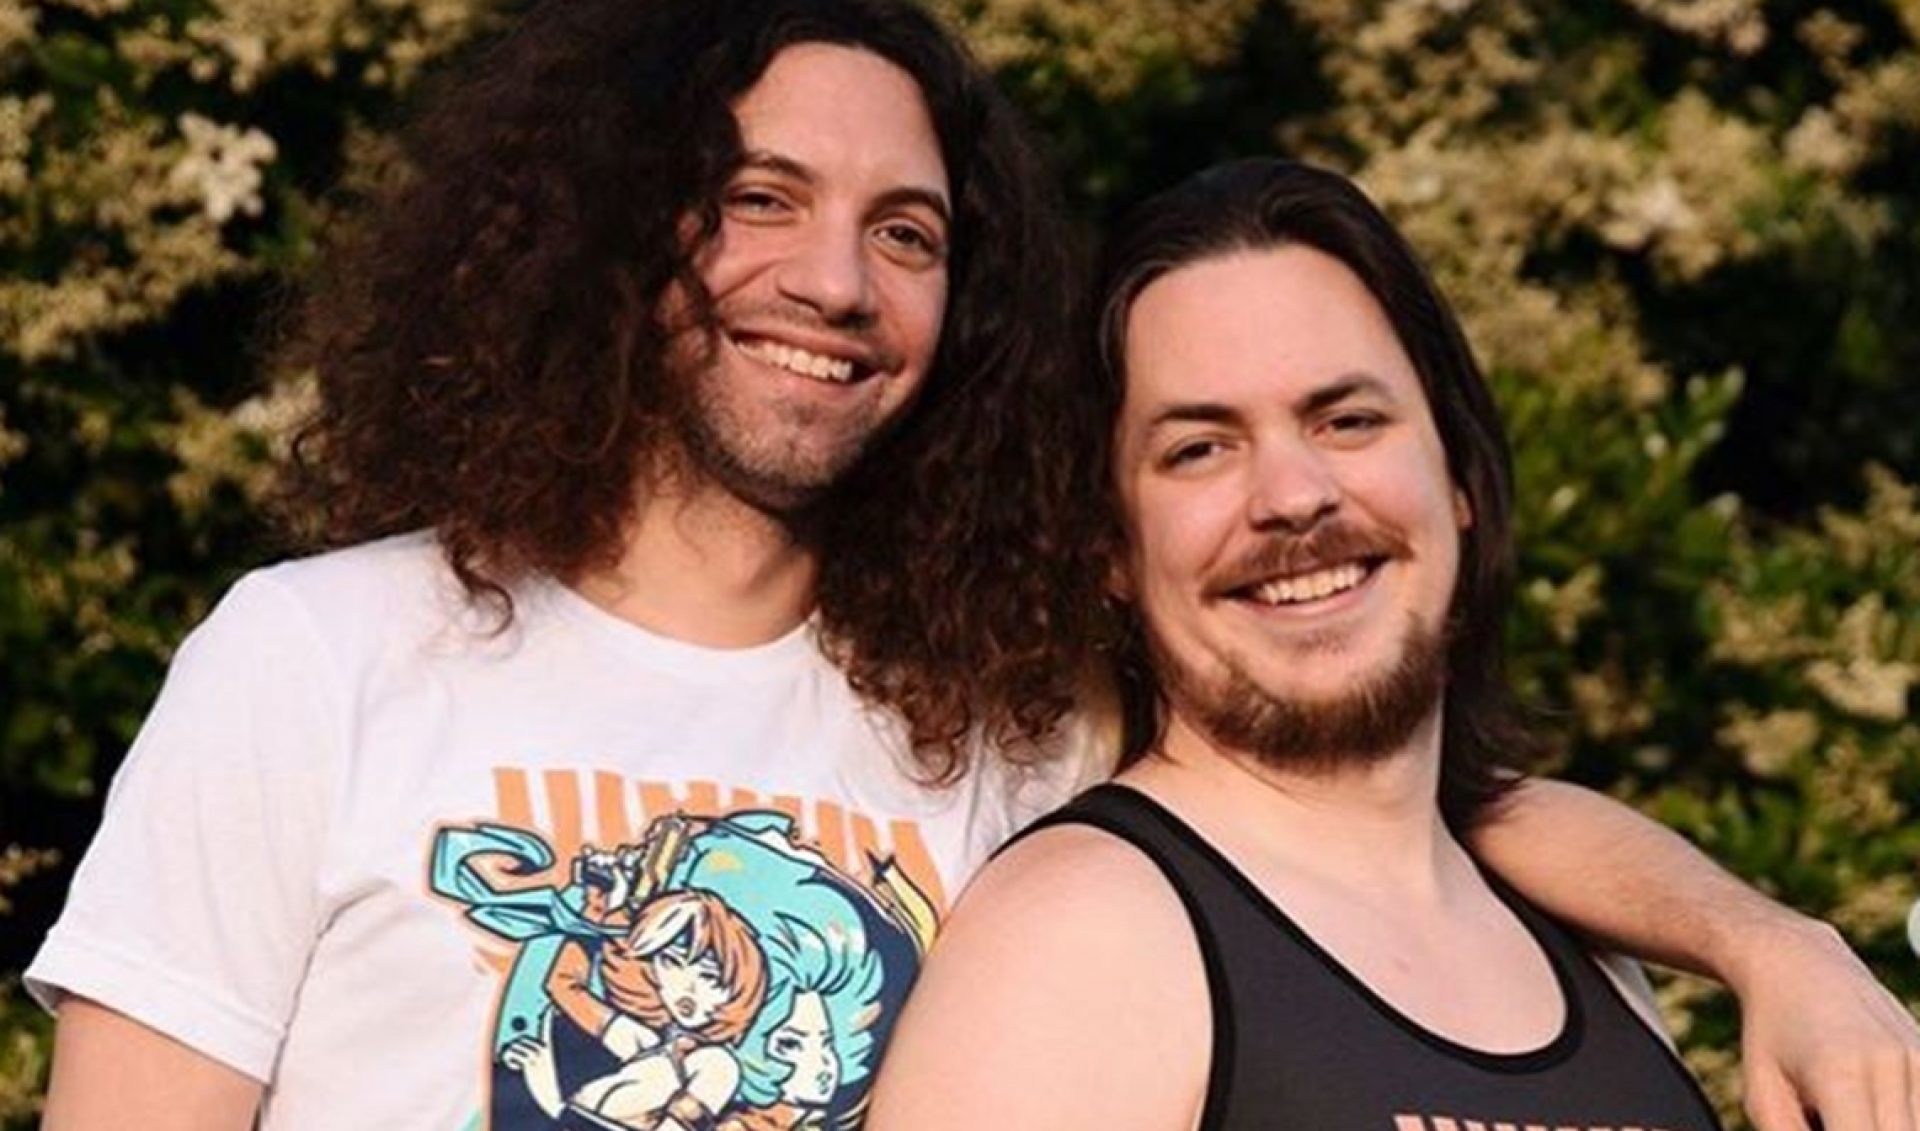 CAA Signs ‘Game Grumps’, Inks Book Deal For Gaming And Comedy Duo